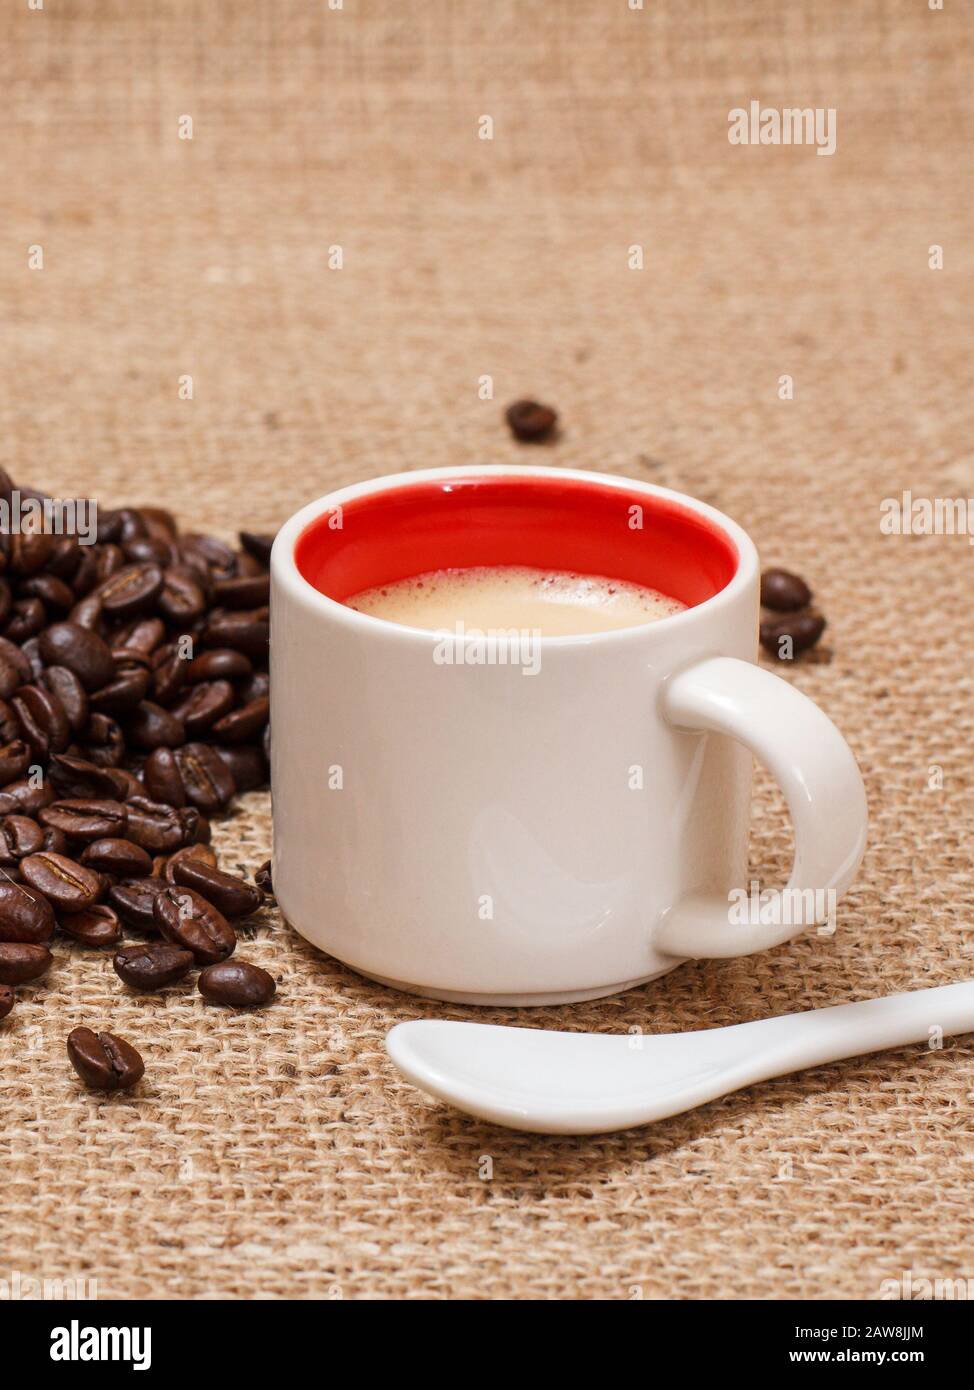 Cup of coffee, spoon and roasted coffee beans on sackcloth. Stock Photo